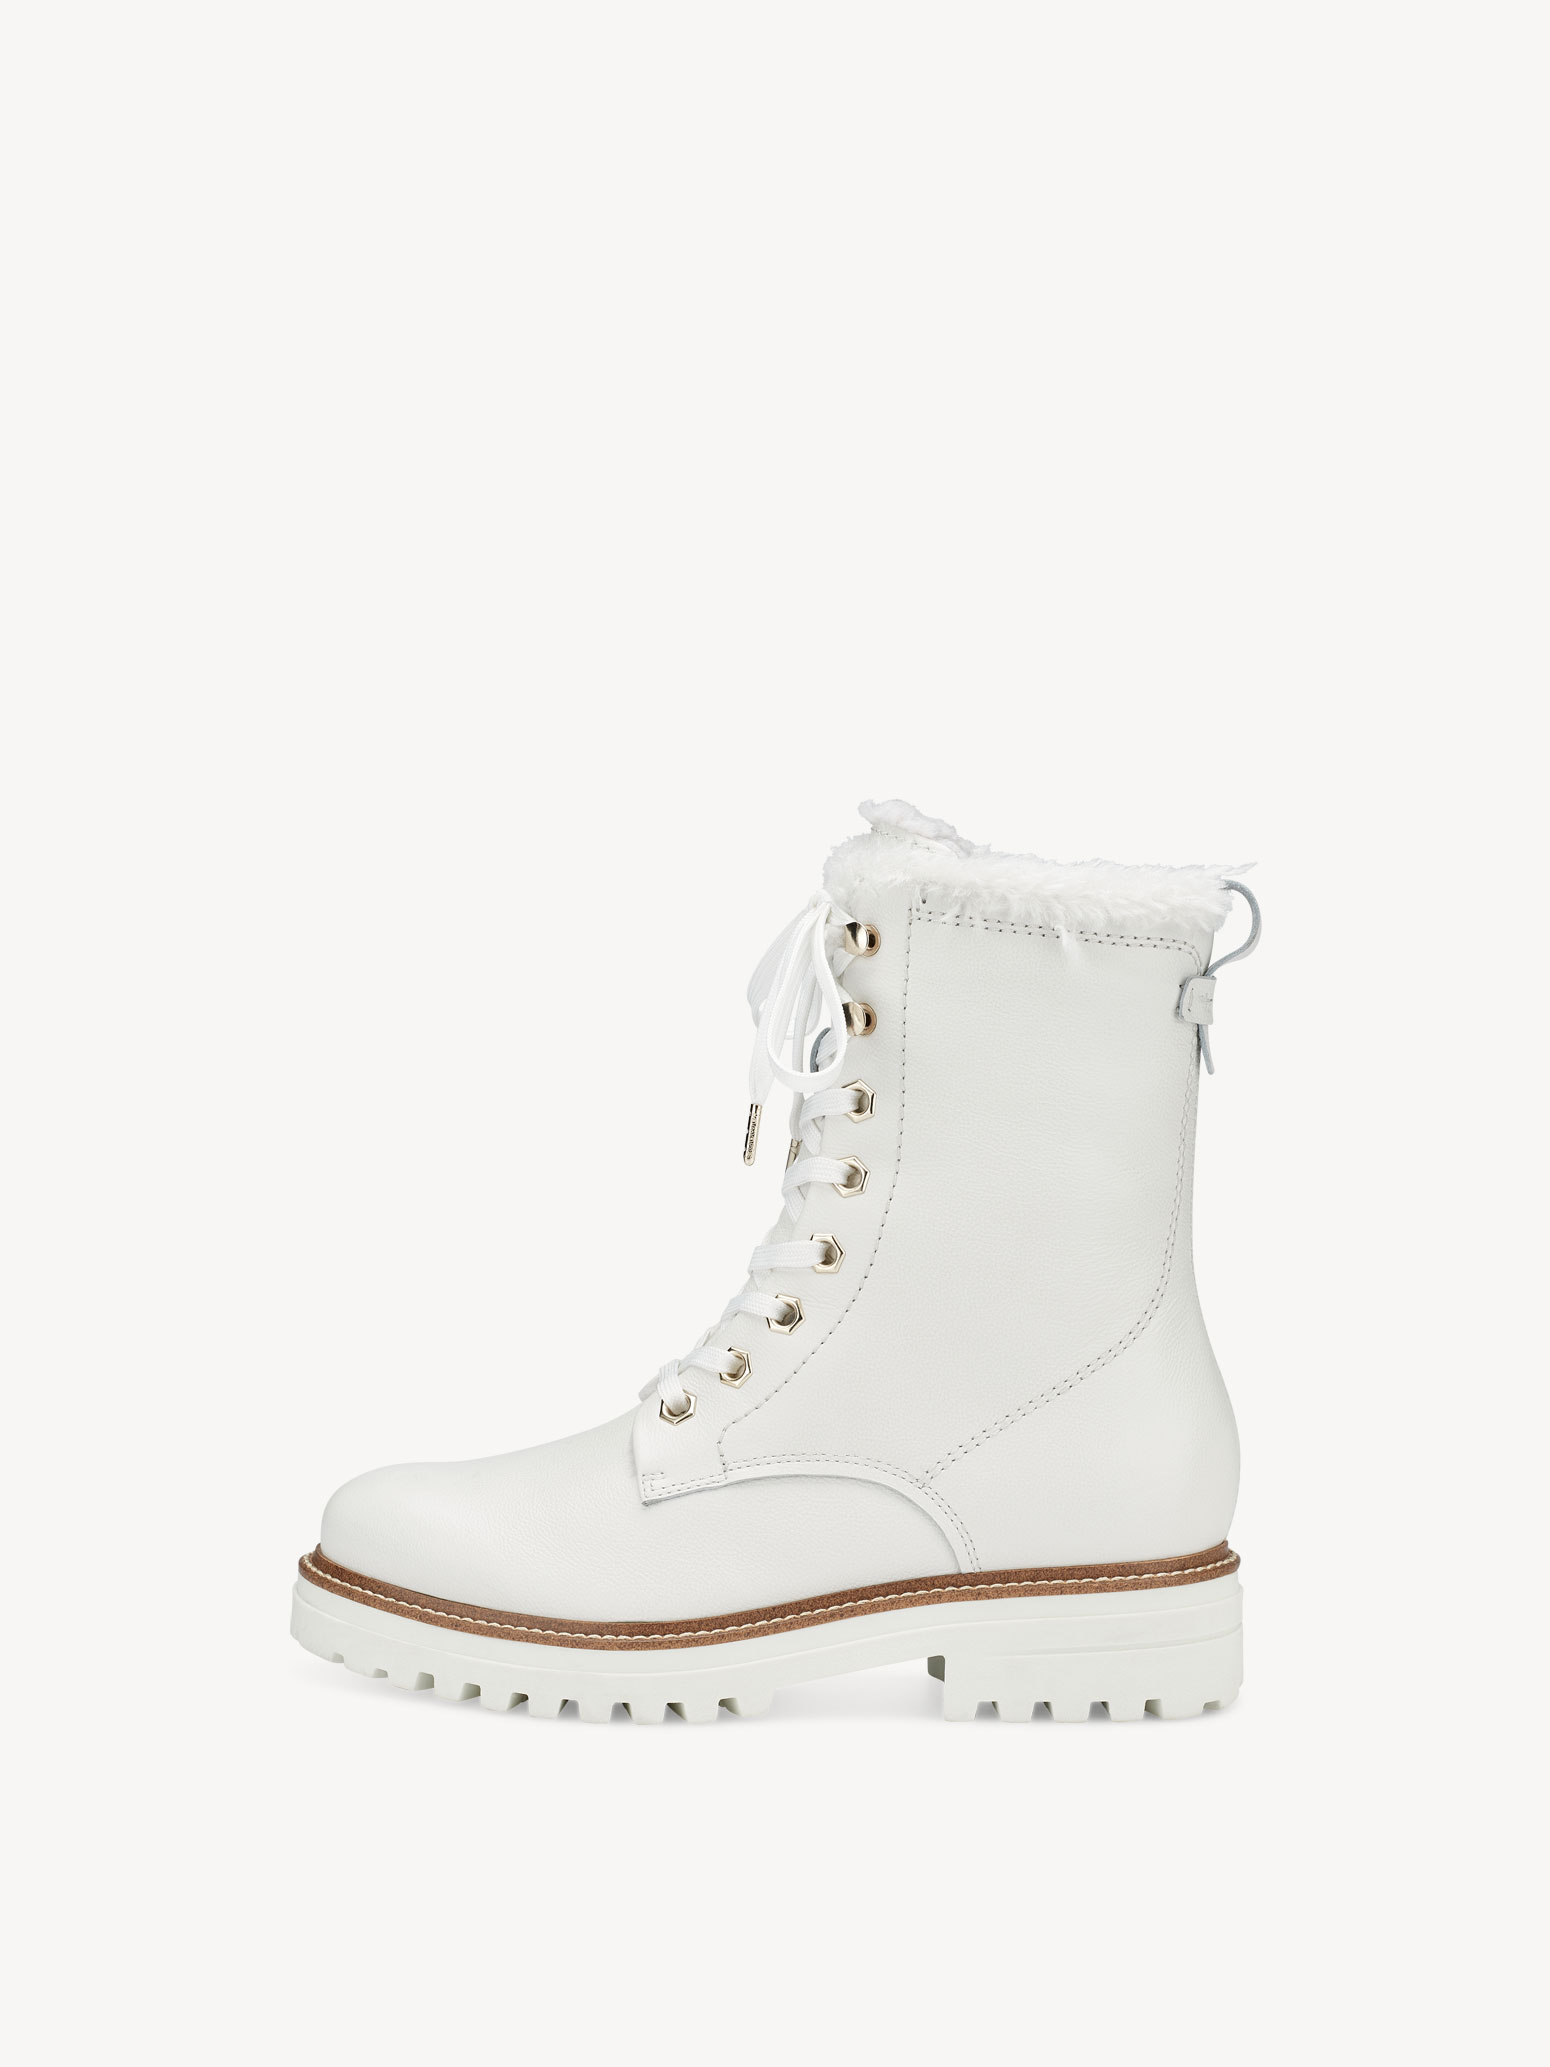 Leather Bootie - white warm lining